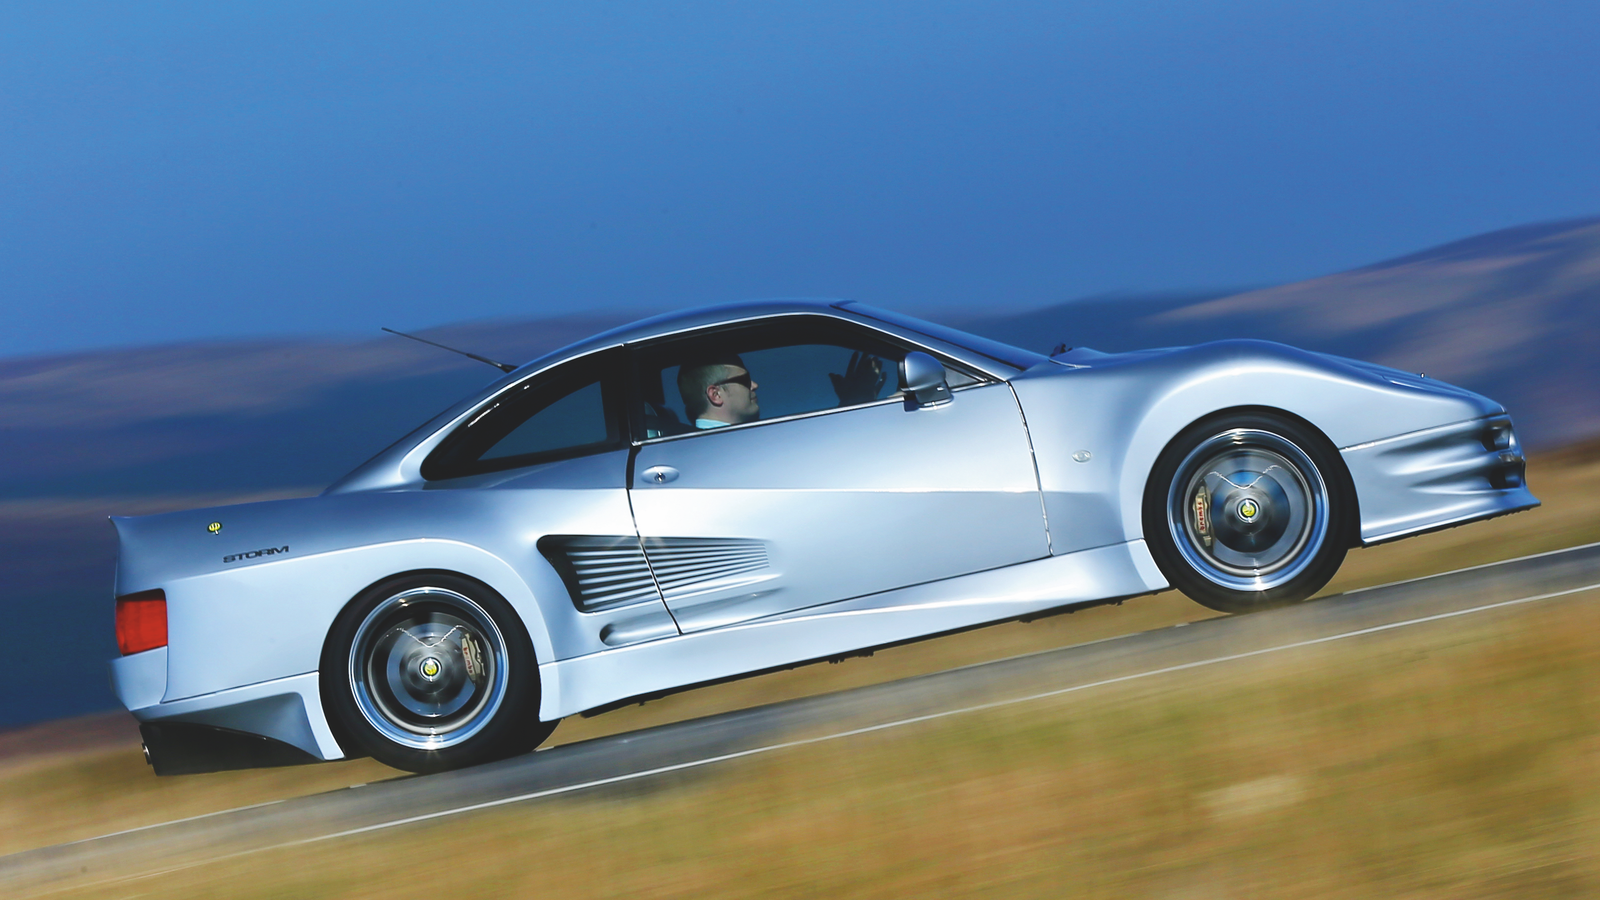 Meet the bonkers British supercar you’ve never heard of